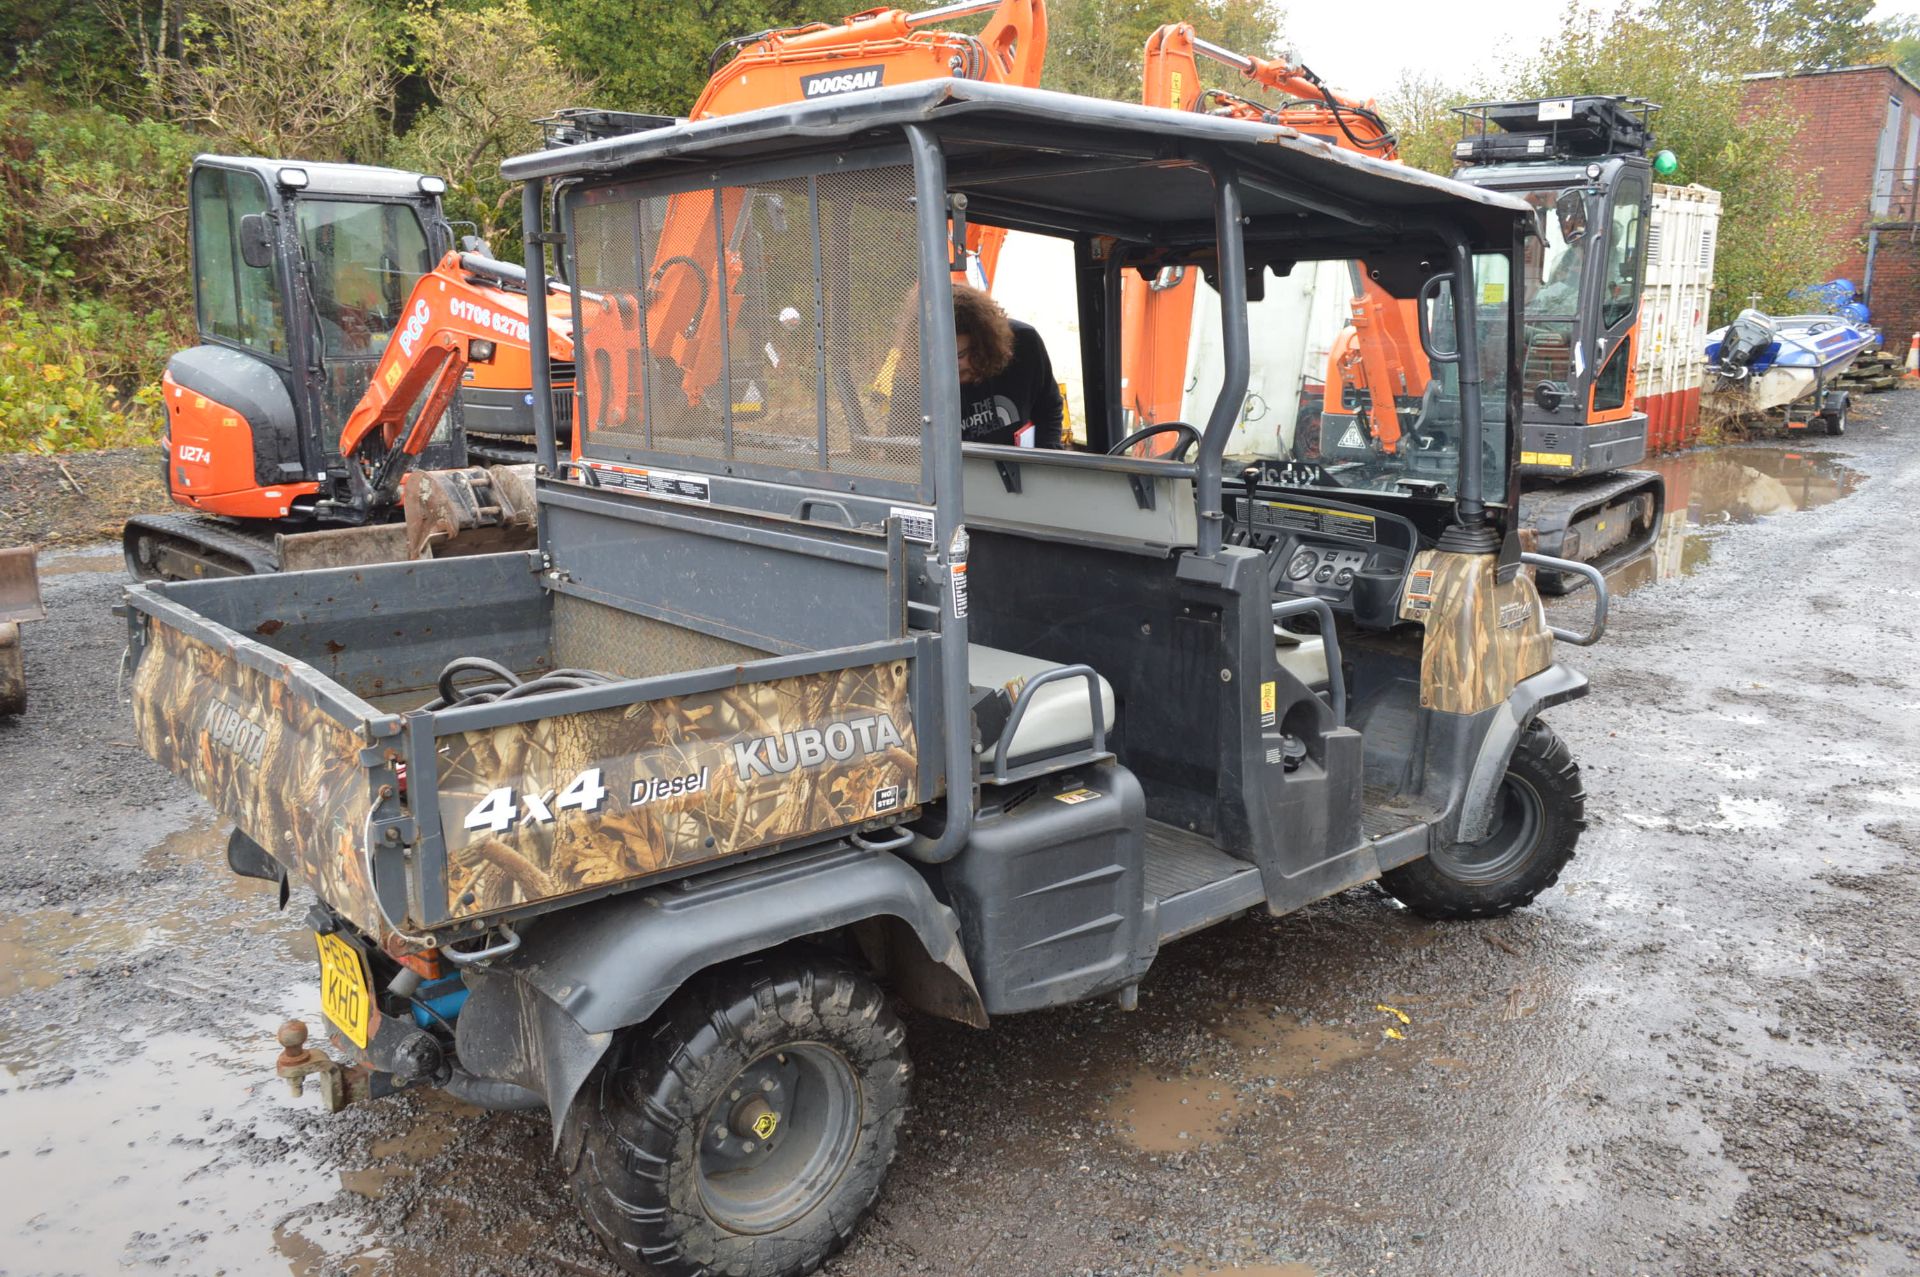 Kubota RTV 1140 CPX 4x4 Diesel Utility Vehicle, registration no. PE13 KHO, date first registered - Image 3 of 6